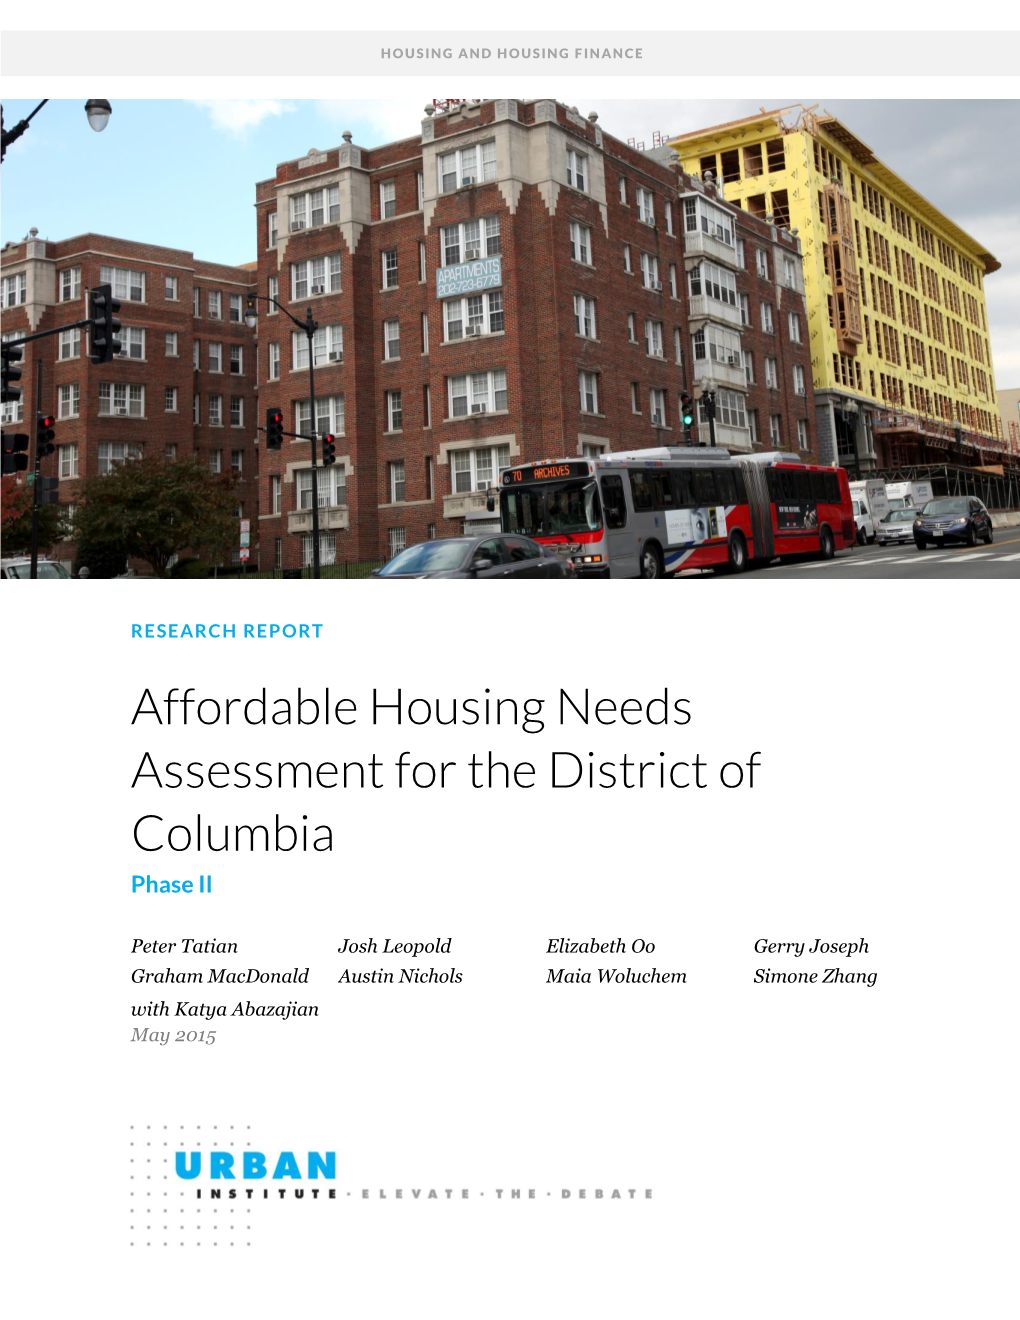 Affordable Housing Needs Assessment for the District of Columbia Phase II